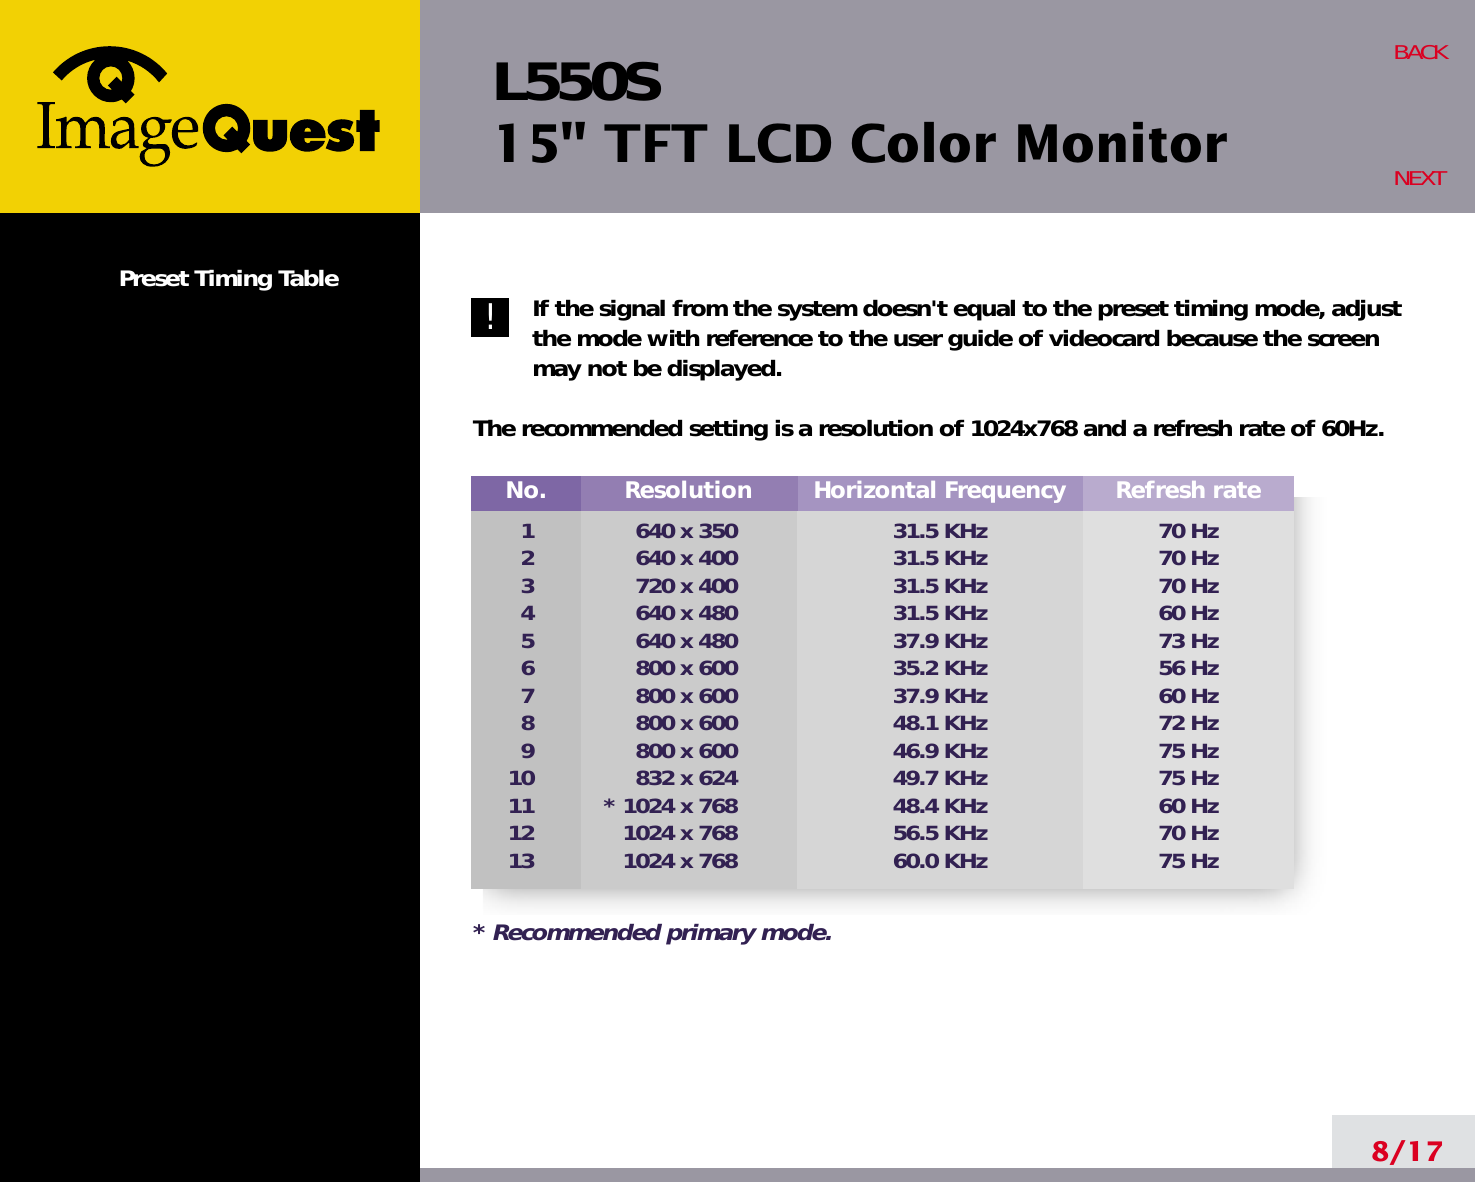 L550S15&quot; TFT LCD Color MonitorPreset Timing Table If the signal from the system doesn&apos;t equal to the preset timing mode, adjustthe mode with reference to the user guide of videocard because the screenmay not be displayed.The recommended setting is a resolution of 1024x768 and a refresh rate of 60Hz.8/17BACKNEXT!No. 1 2 3 4 5   6   7   8   9 10 11 12 13Resolution640 x 350640 x 400720 x 400640 x 480640 x 480800 x 600800 x 600800 x 600800 x 600832 x 624* 1024 x 7681024 x 7681024 x 768Horizontal Frequency31.5 KHz31.5 KHz31.5 KHz31.5 KHz37.9 KHz35.2 KHz37.9 KHz48.1 KHz46.9 KHz49.7 KHz48.4 KHz56.5 KHz60.0 KHzRefresh rate70 Hz70 Hz70 Hz60 Hz73 Hz56 Hz60 Hz72 Hz75 Hz75 Hz60 Hz70 Hz75 Hz* Recommended primary mode.